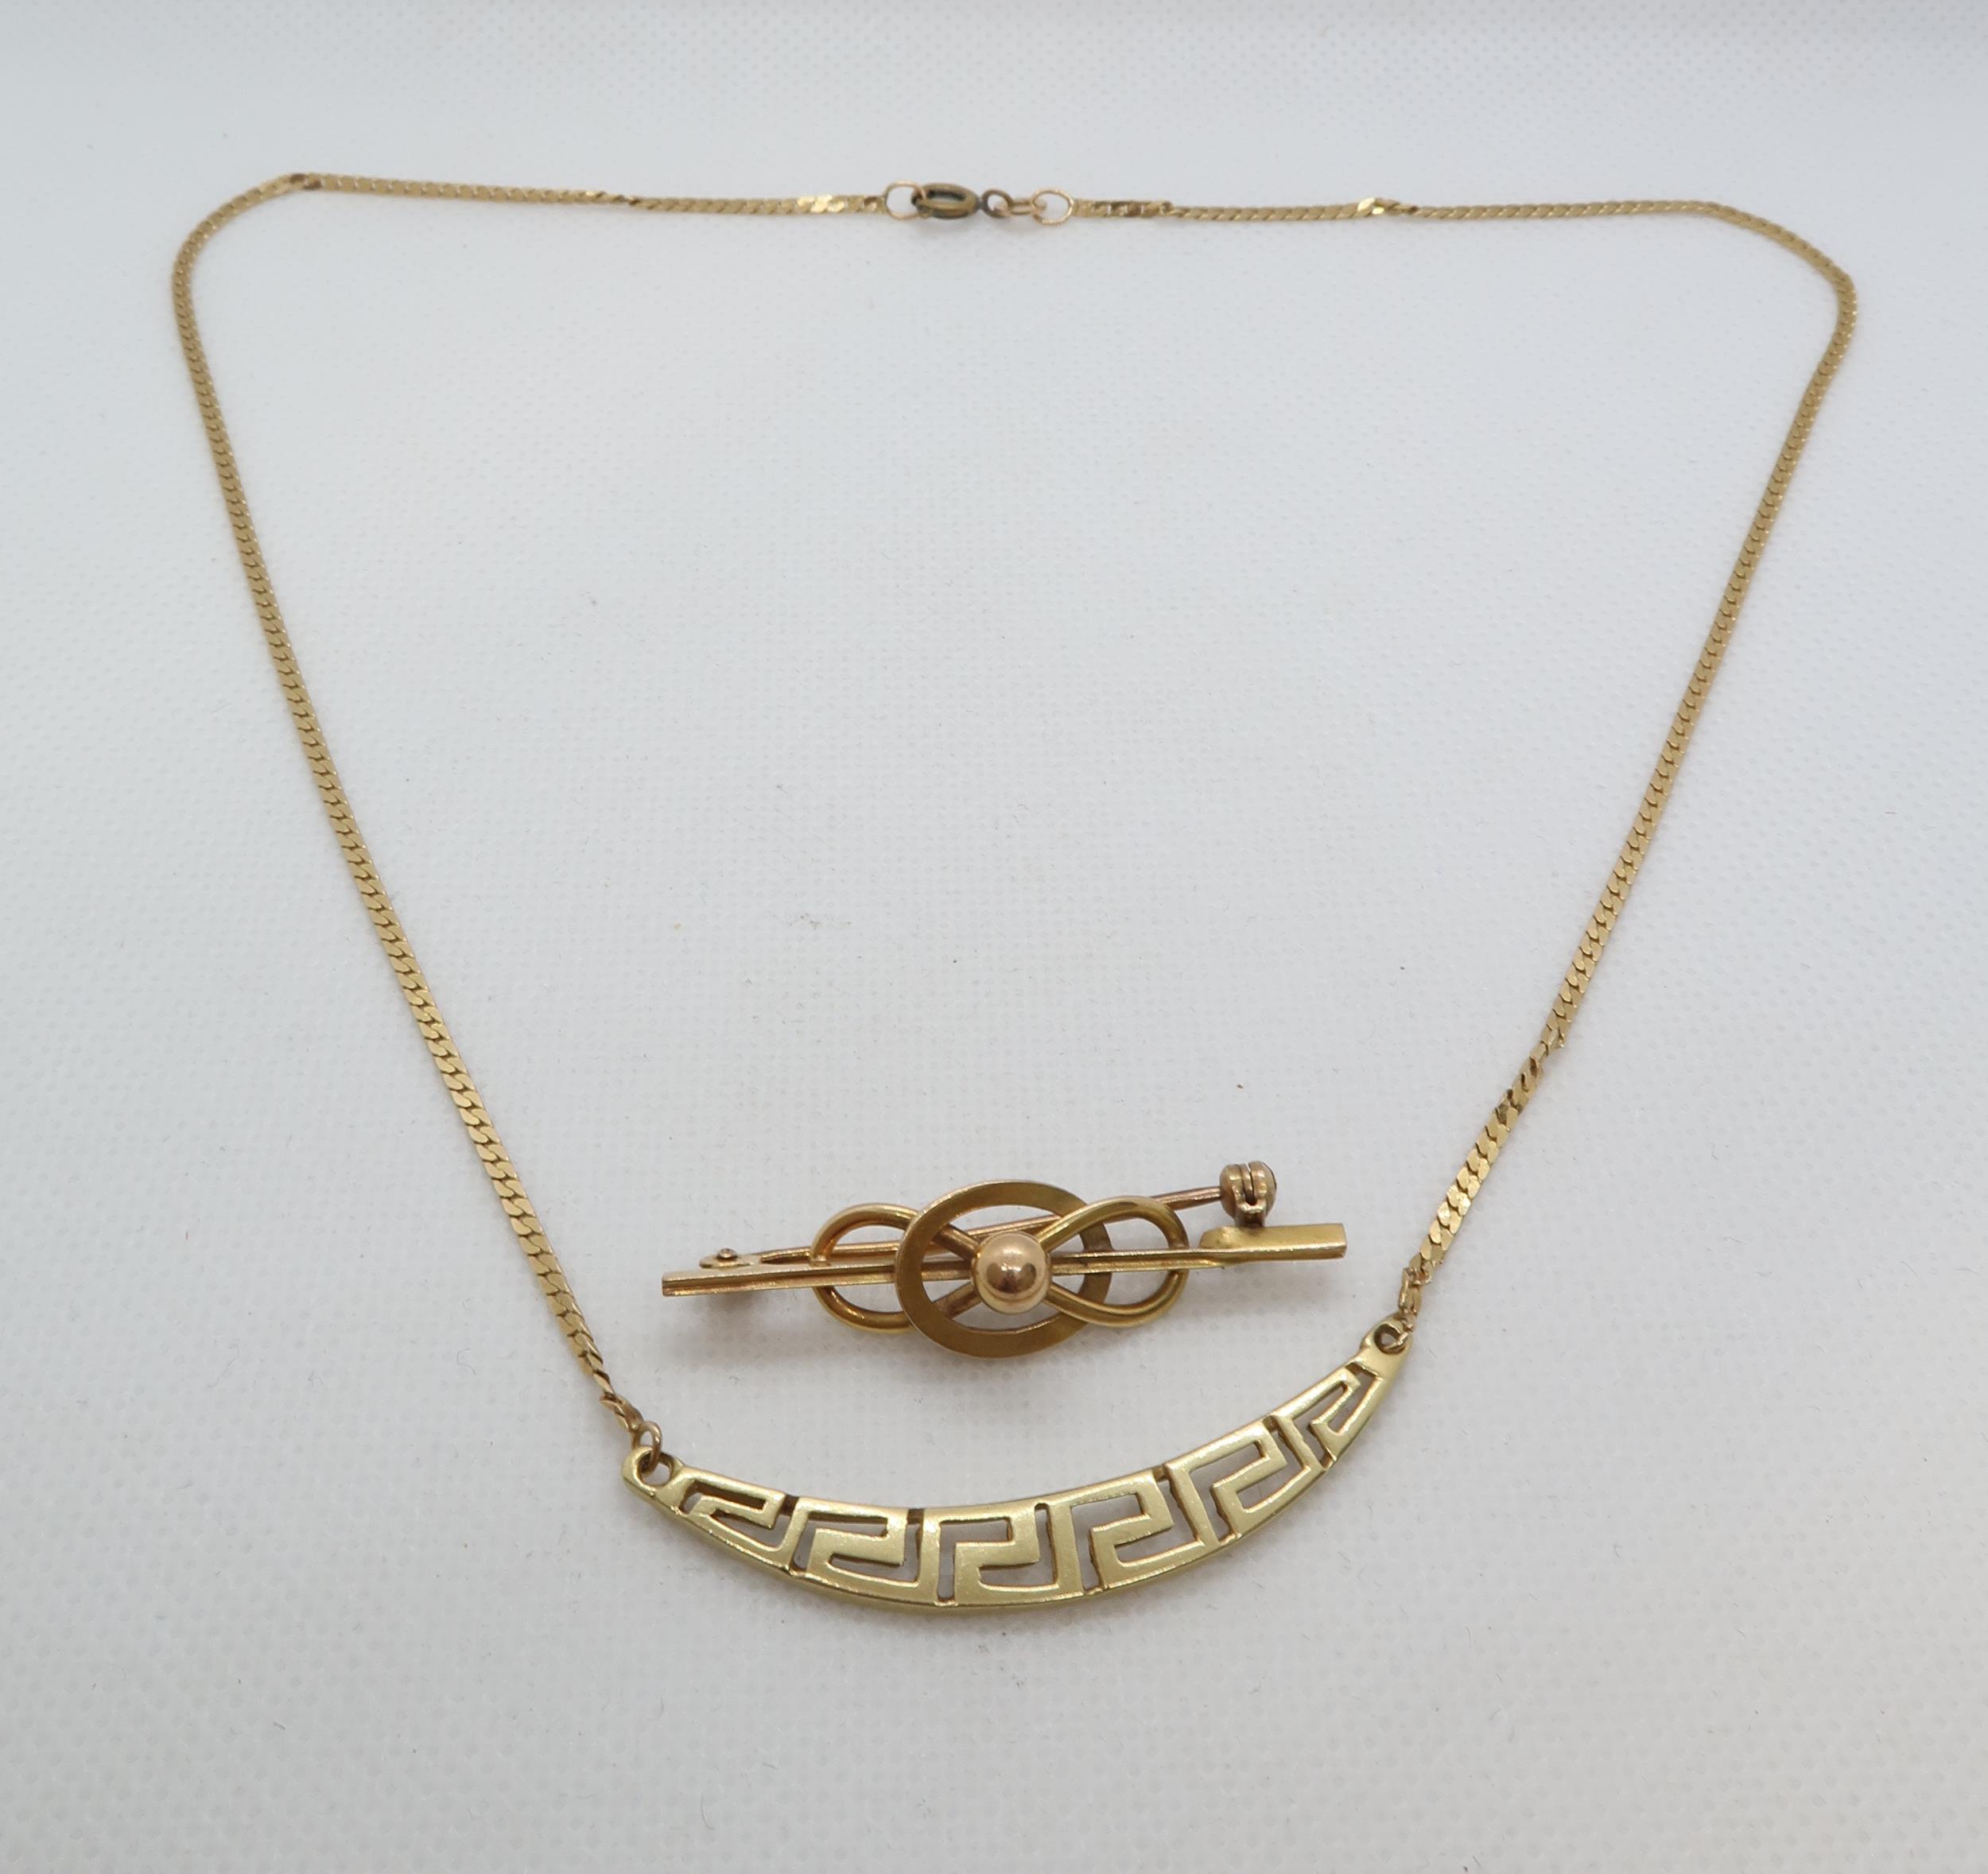 A 14ct yellow gold (hallmarked) necklace - 43cm - together with a 15ct yellow gold (hallmarked)